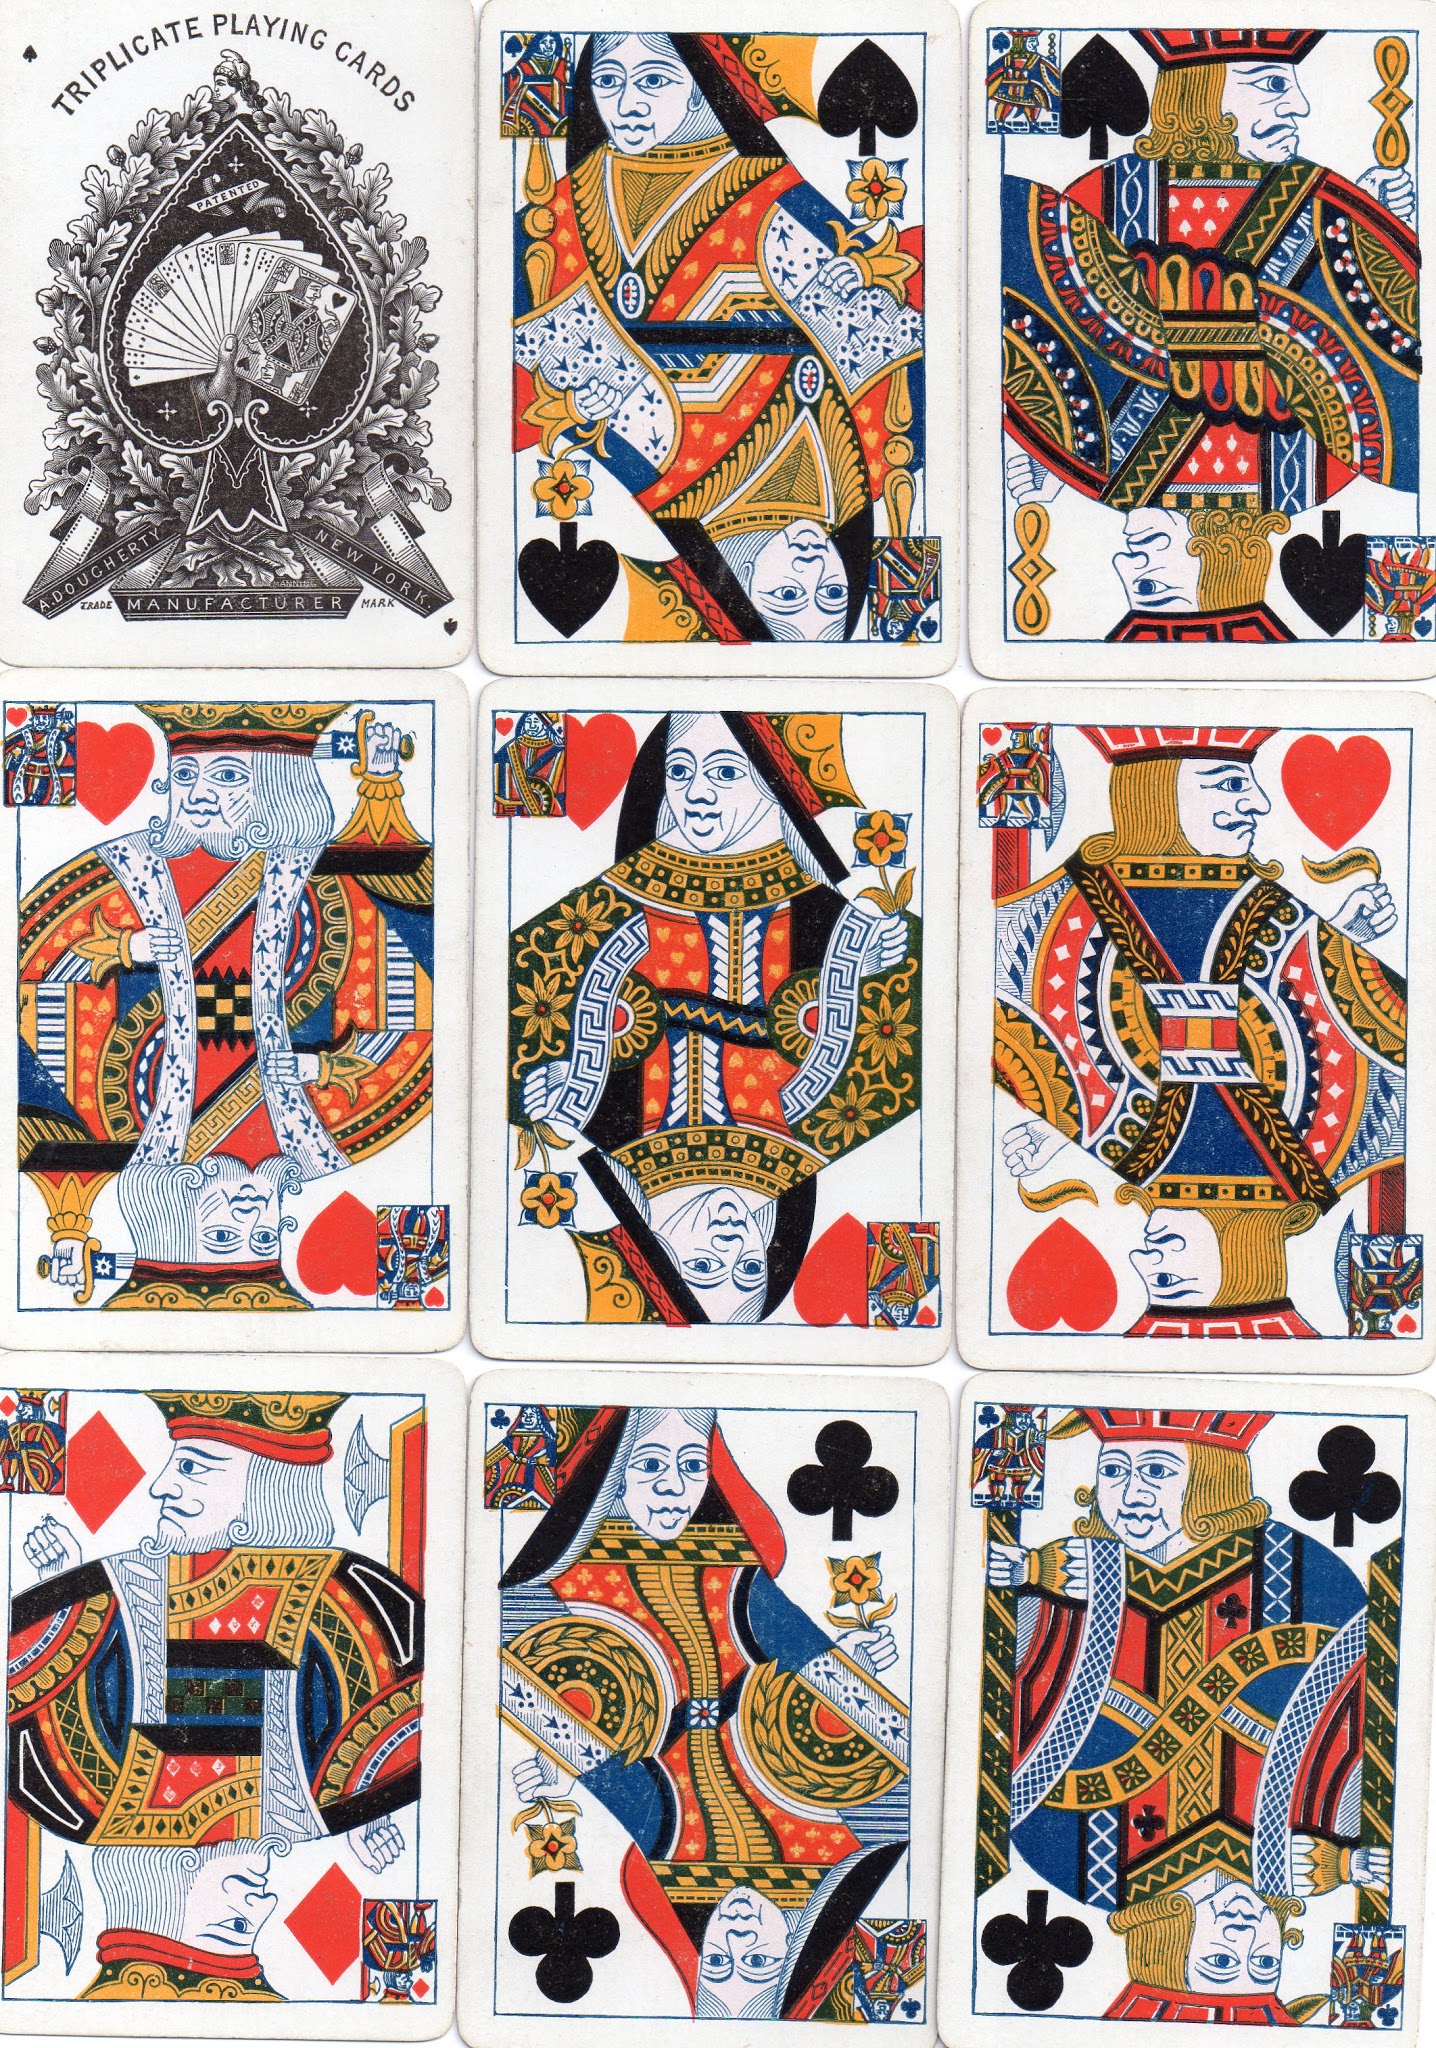 33: Functional Changes to Playing Cards - The World of Playing Cards